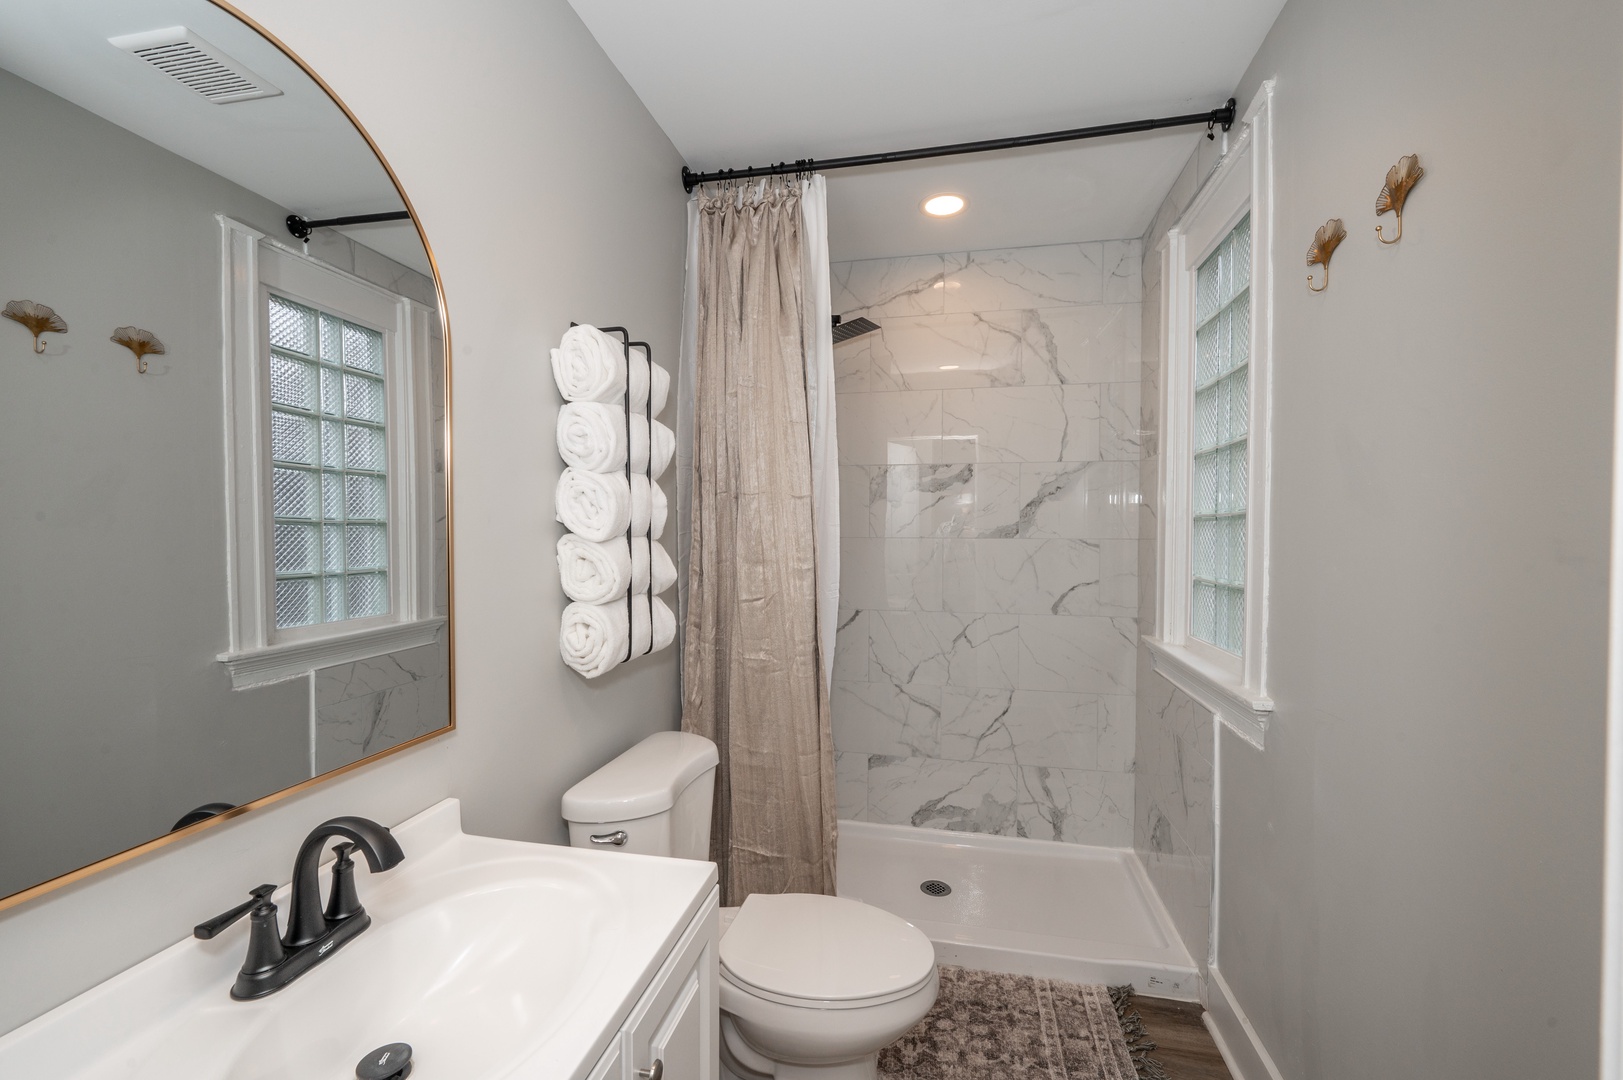 The full bathroom offers guests a single vanity & walk-in shower